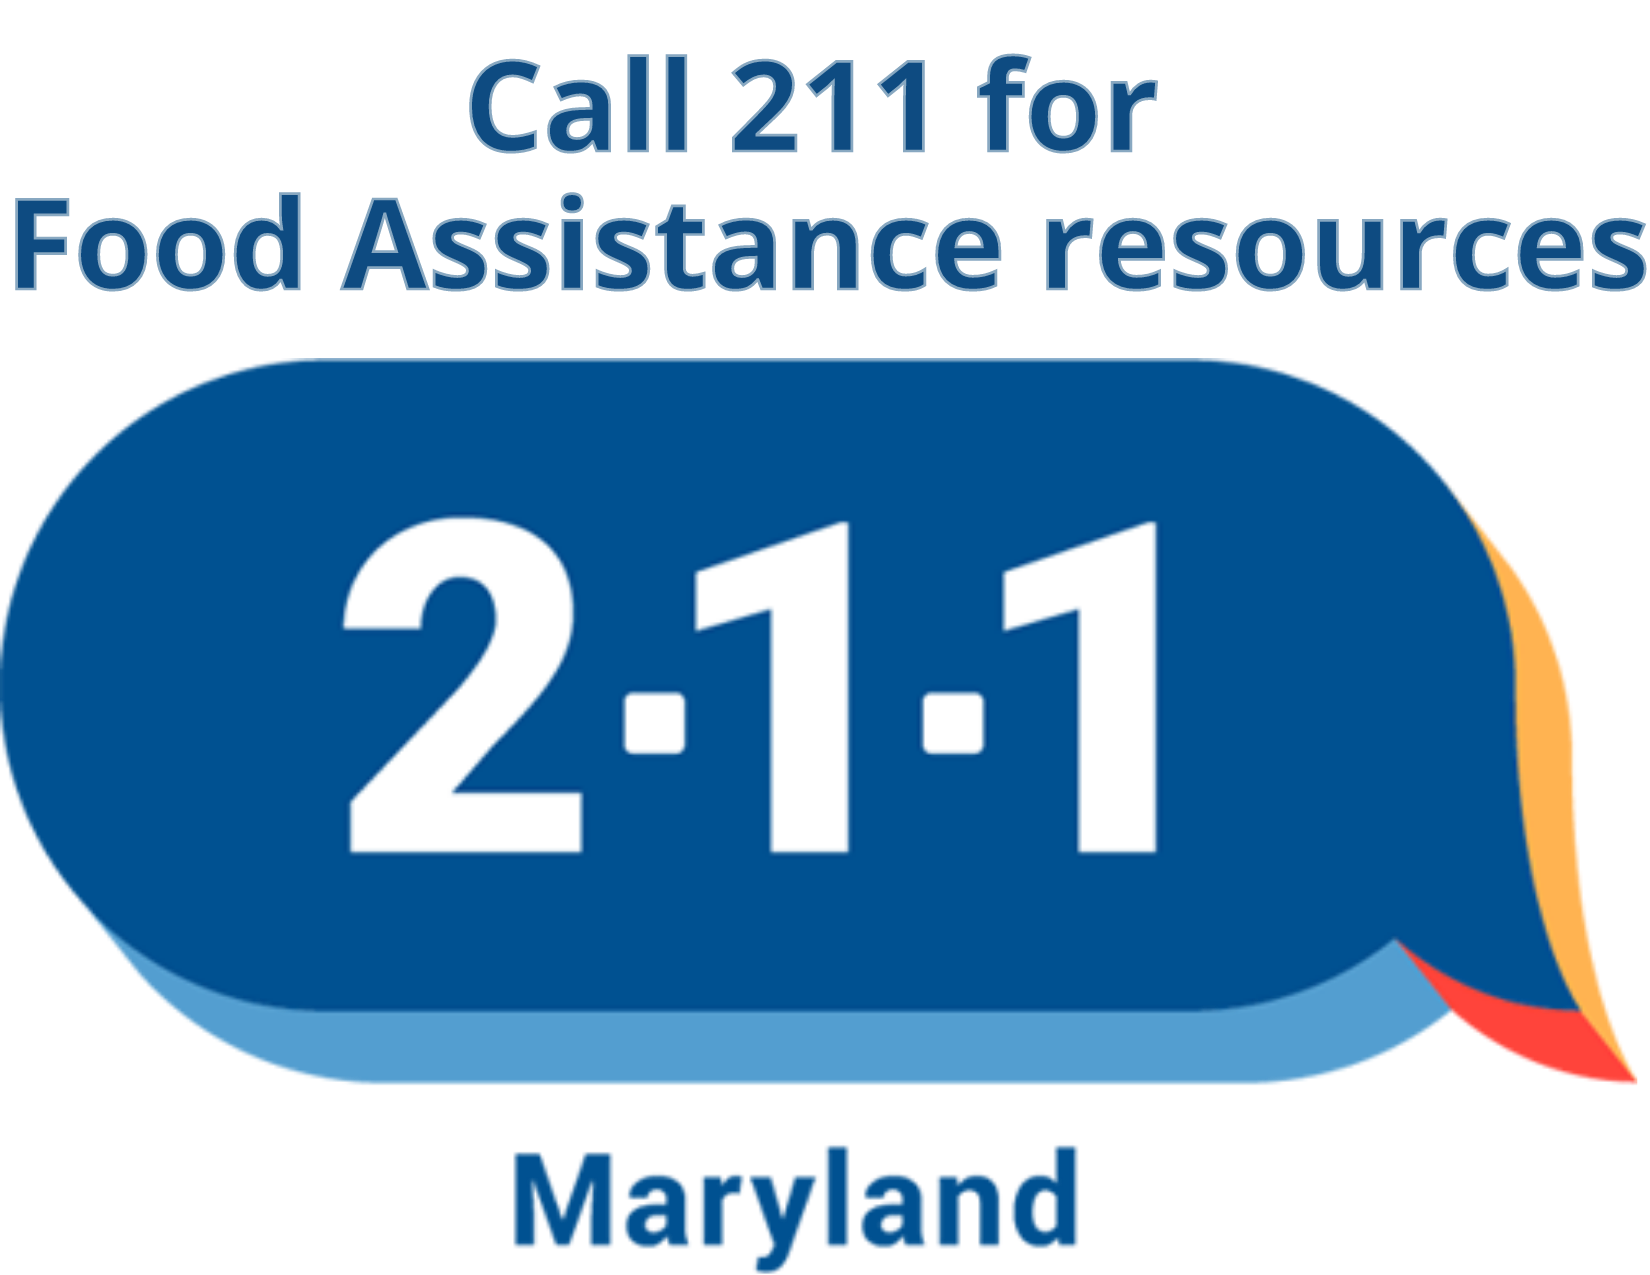 Call 2 1 1 for Maryland Food Assistance resources